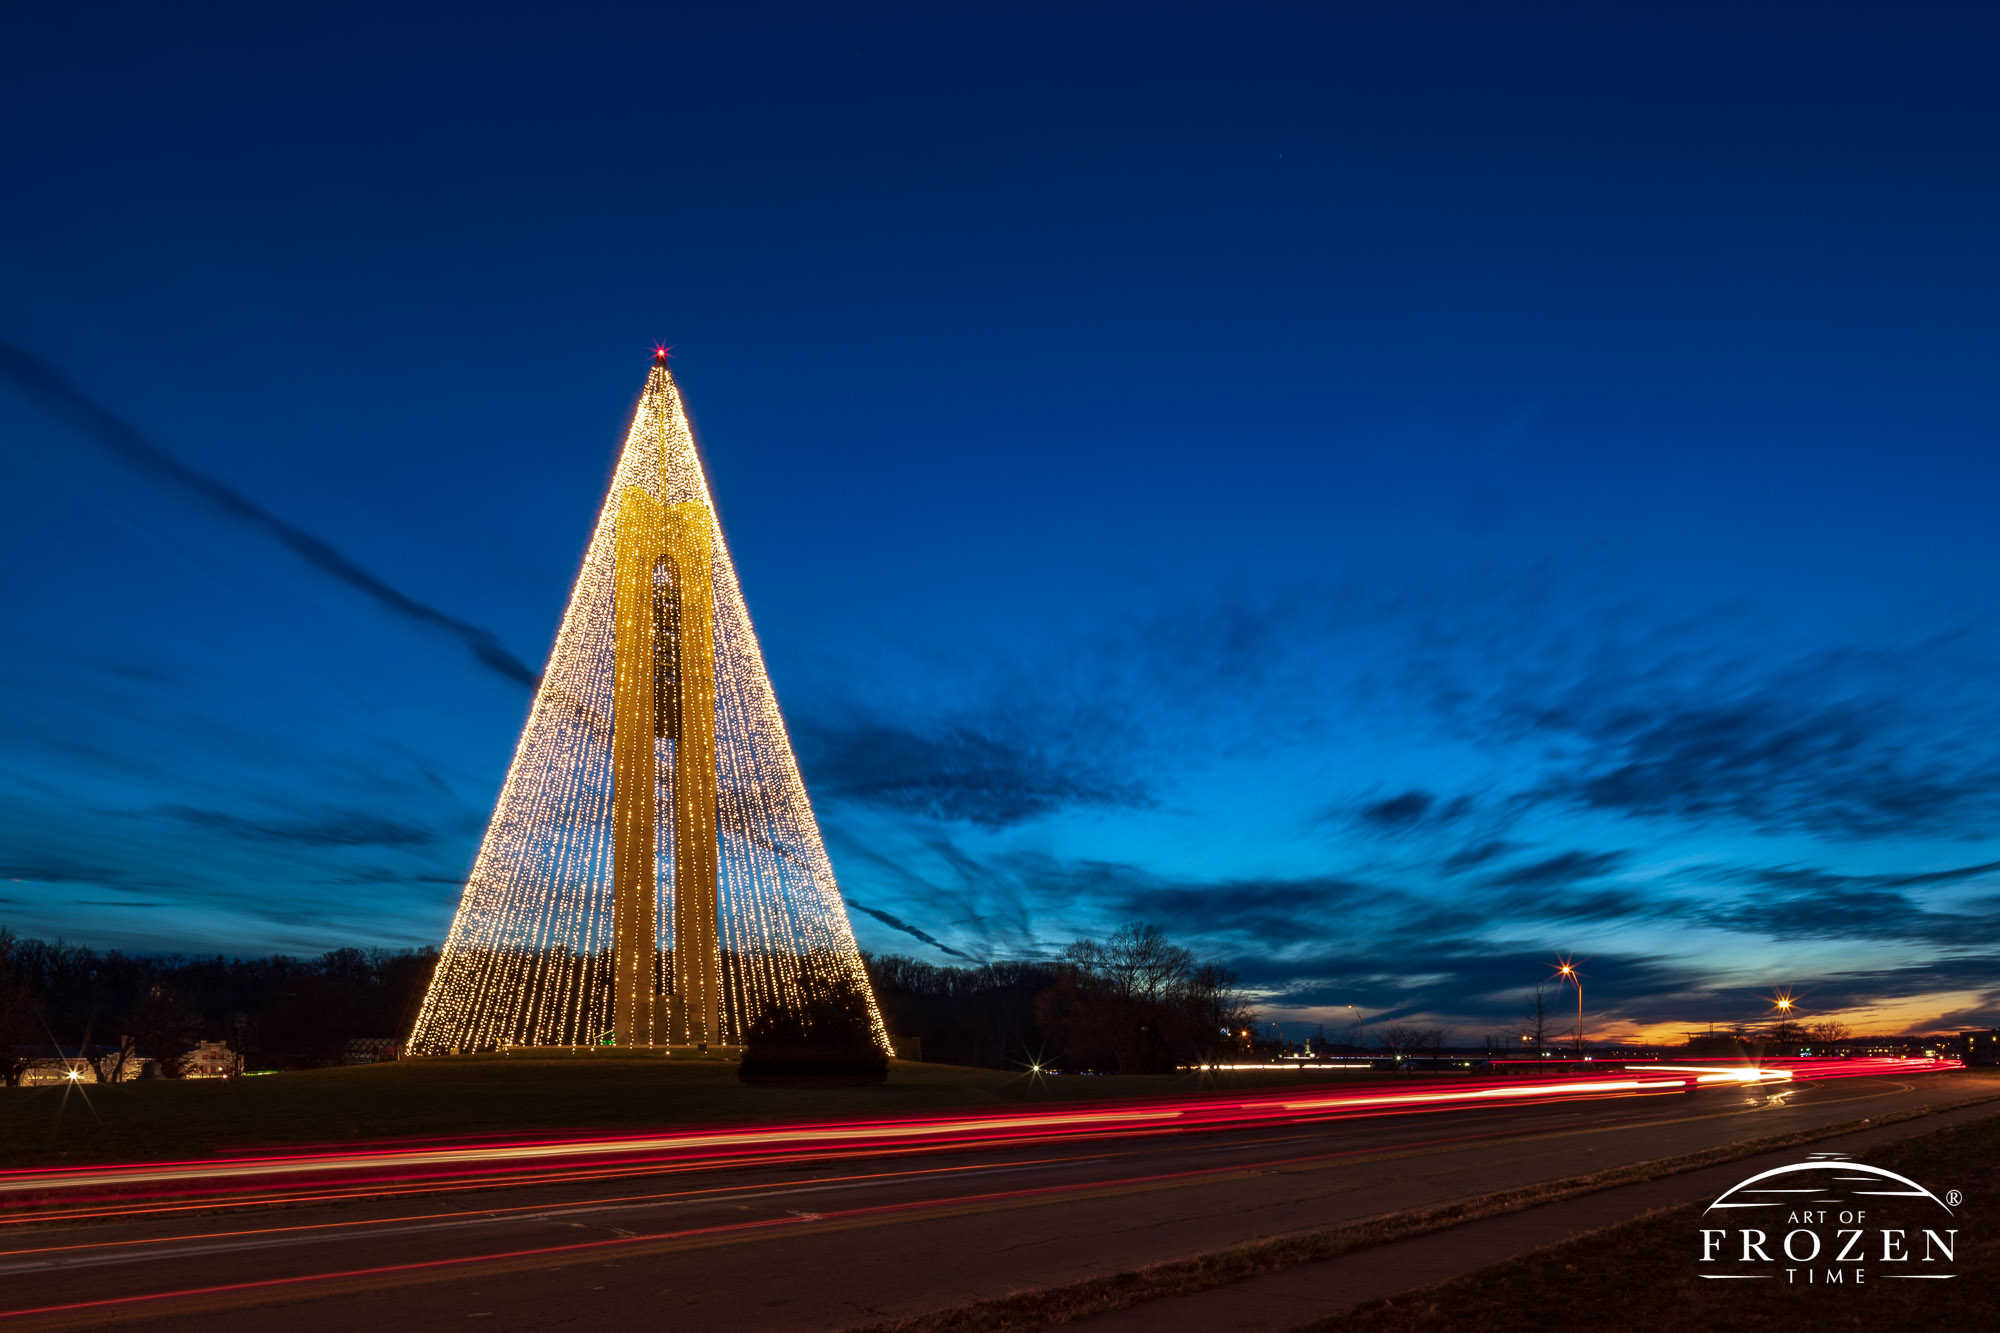 The Deeds Carillon Christmas Tree glows in the deep twilight scene where the long exposures renders traffic as light trails